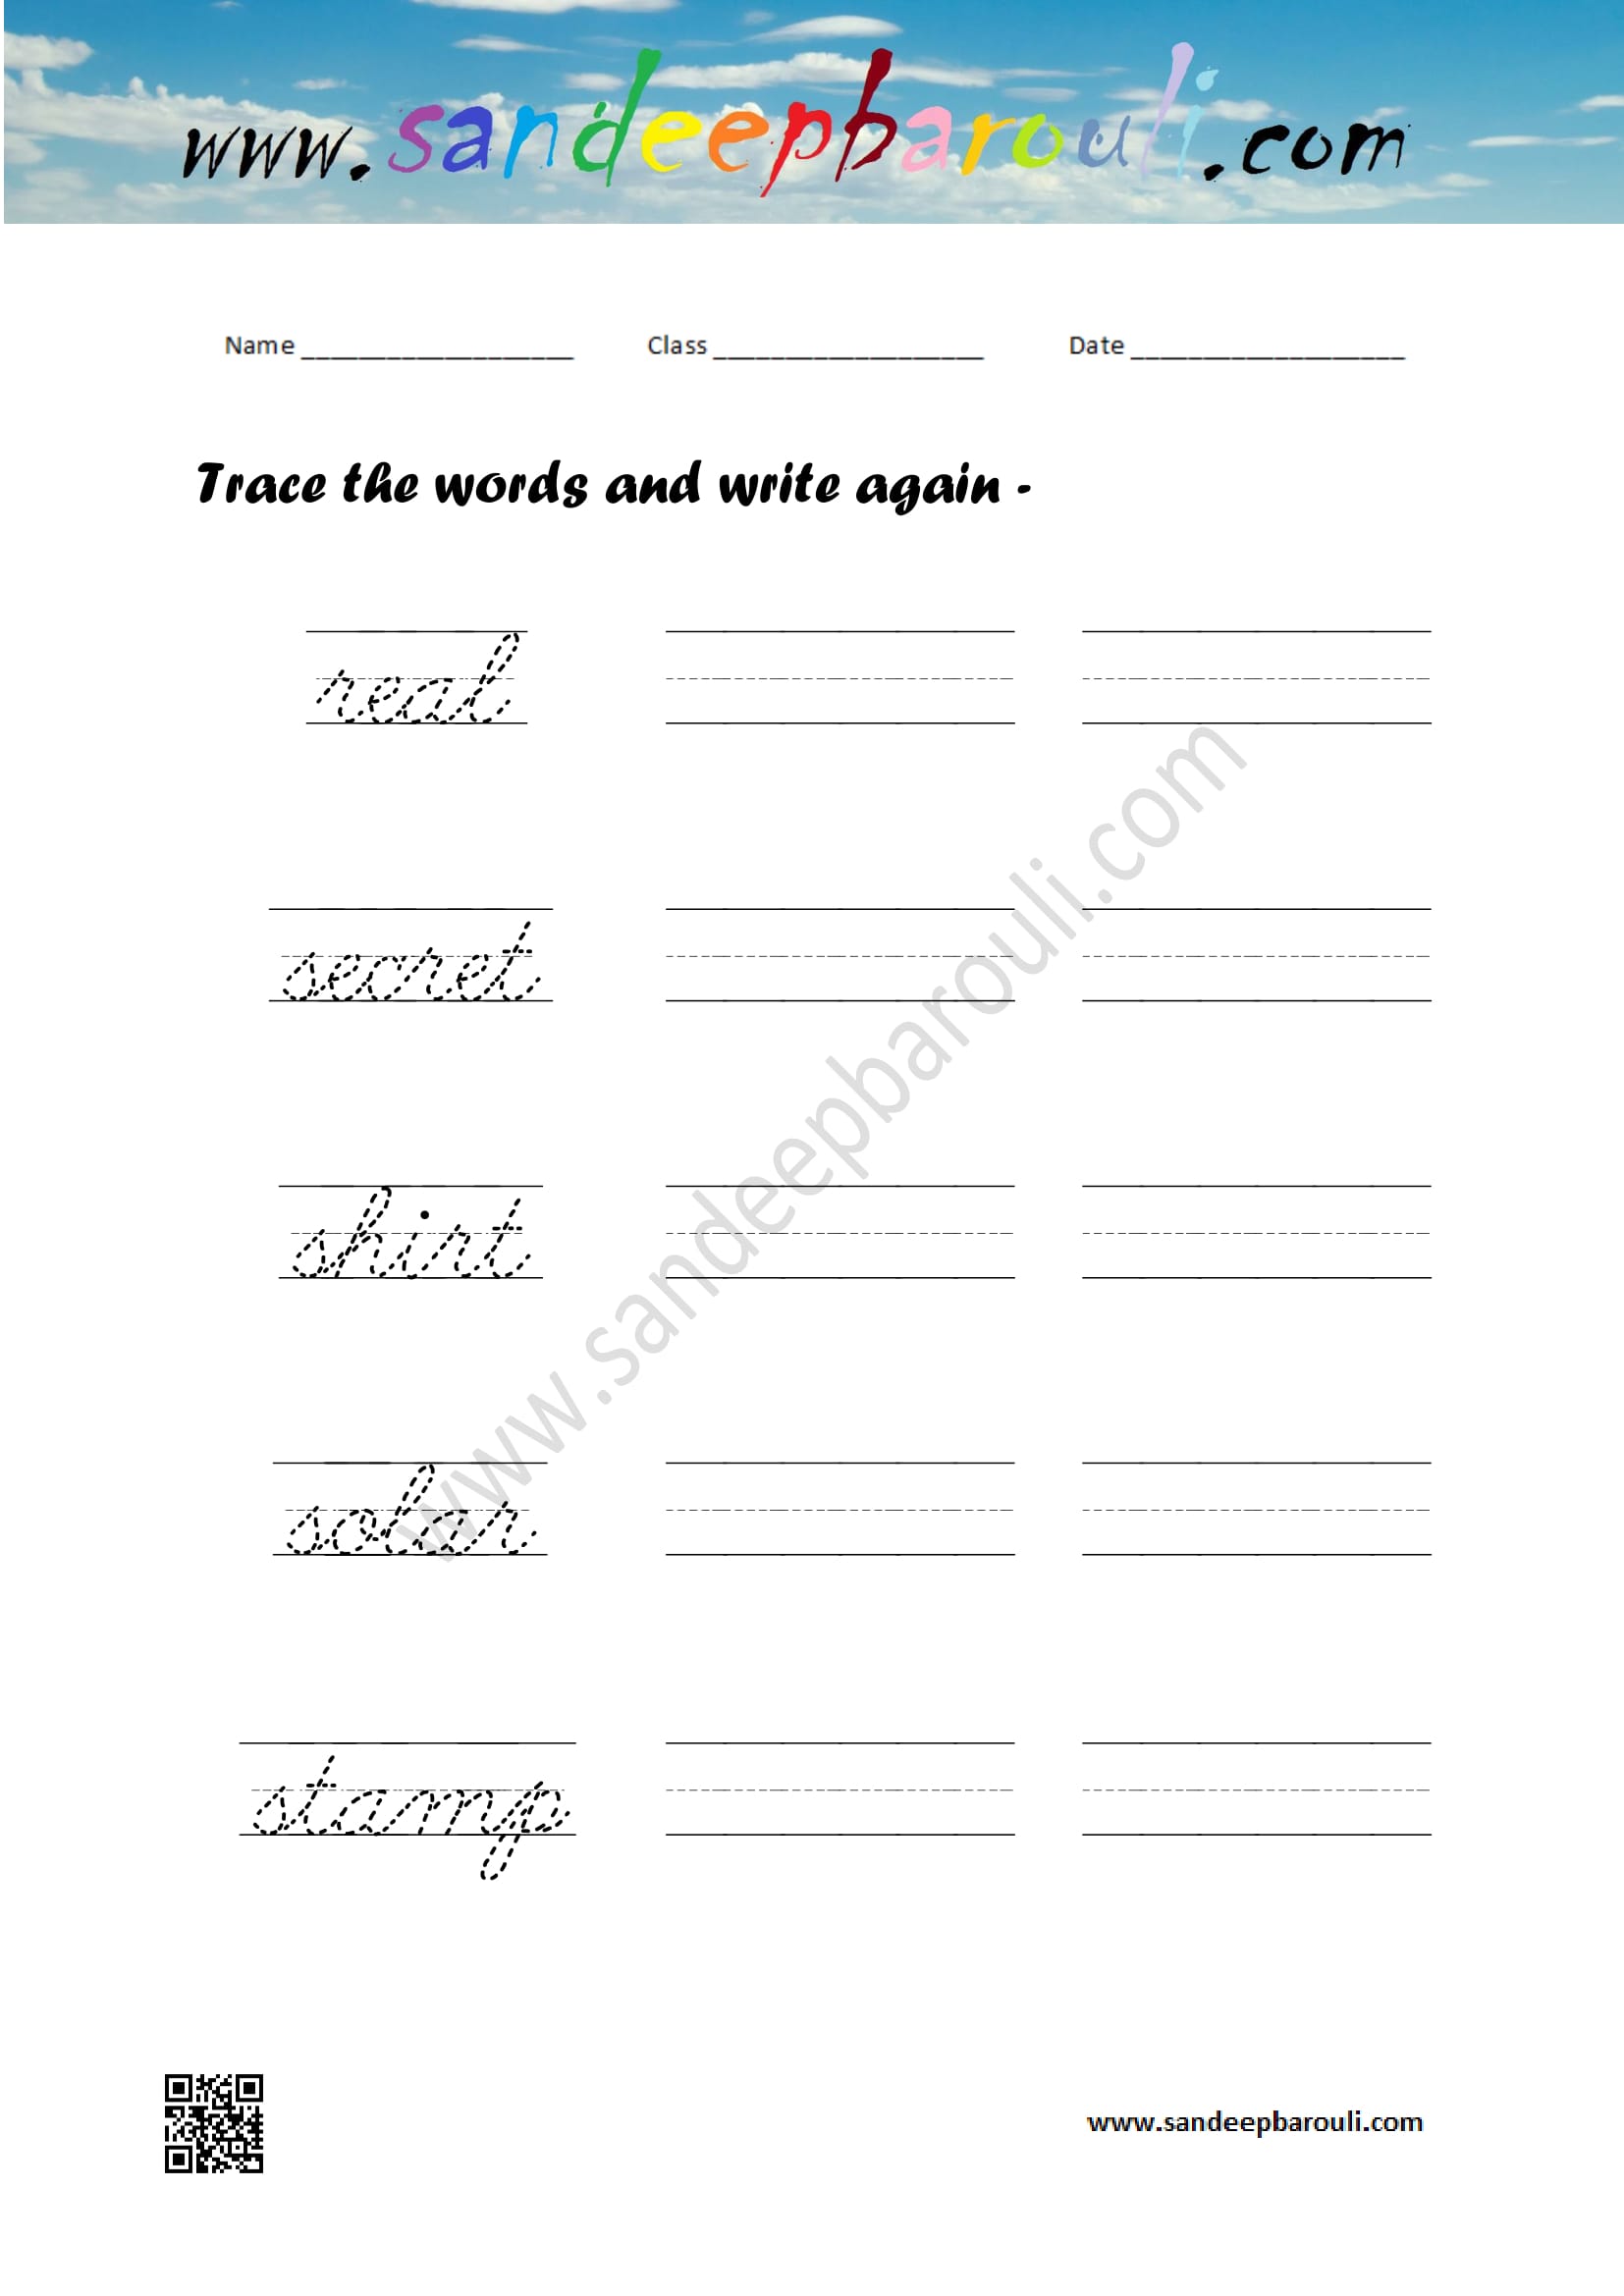 Cursive writing worksheet – trace the words and write again (19